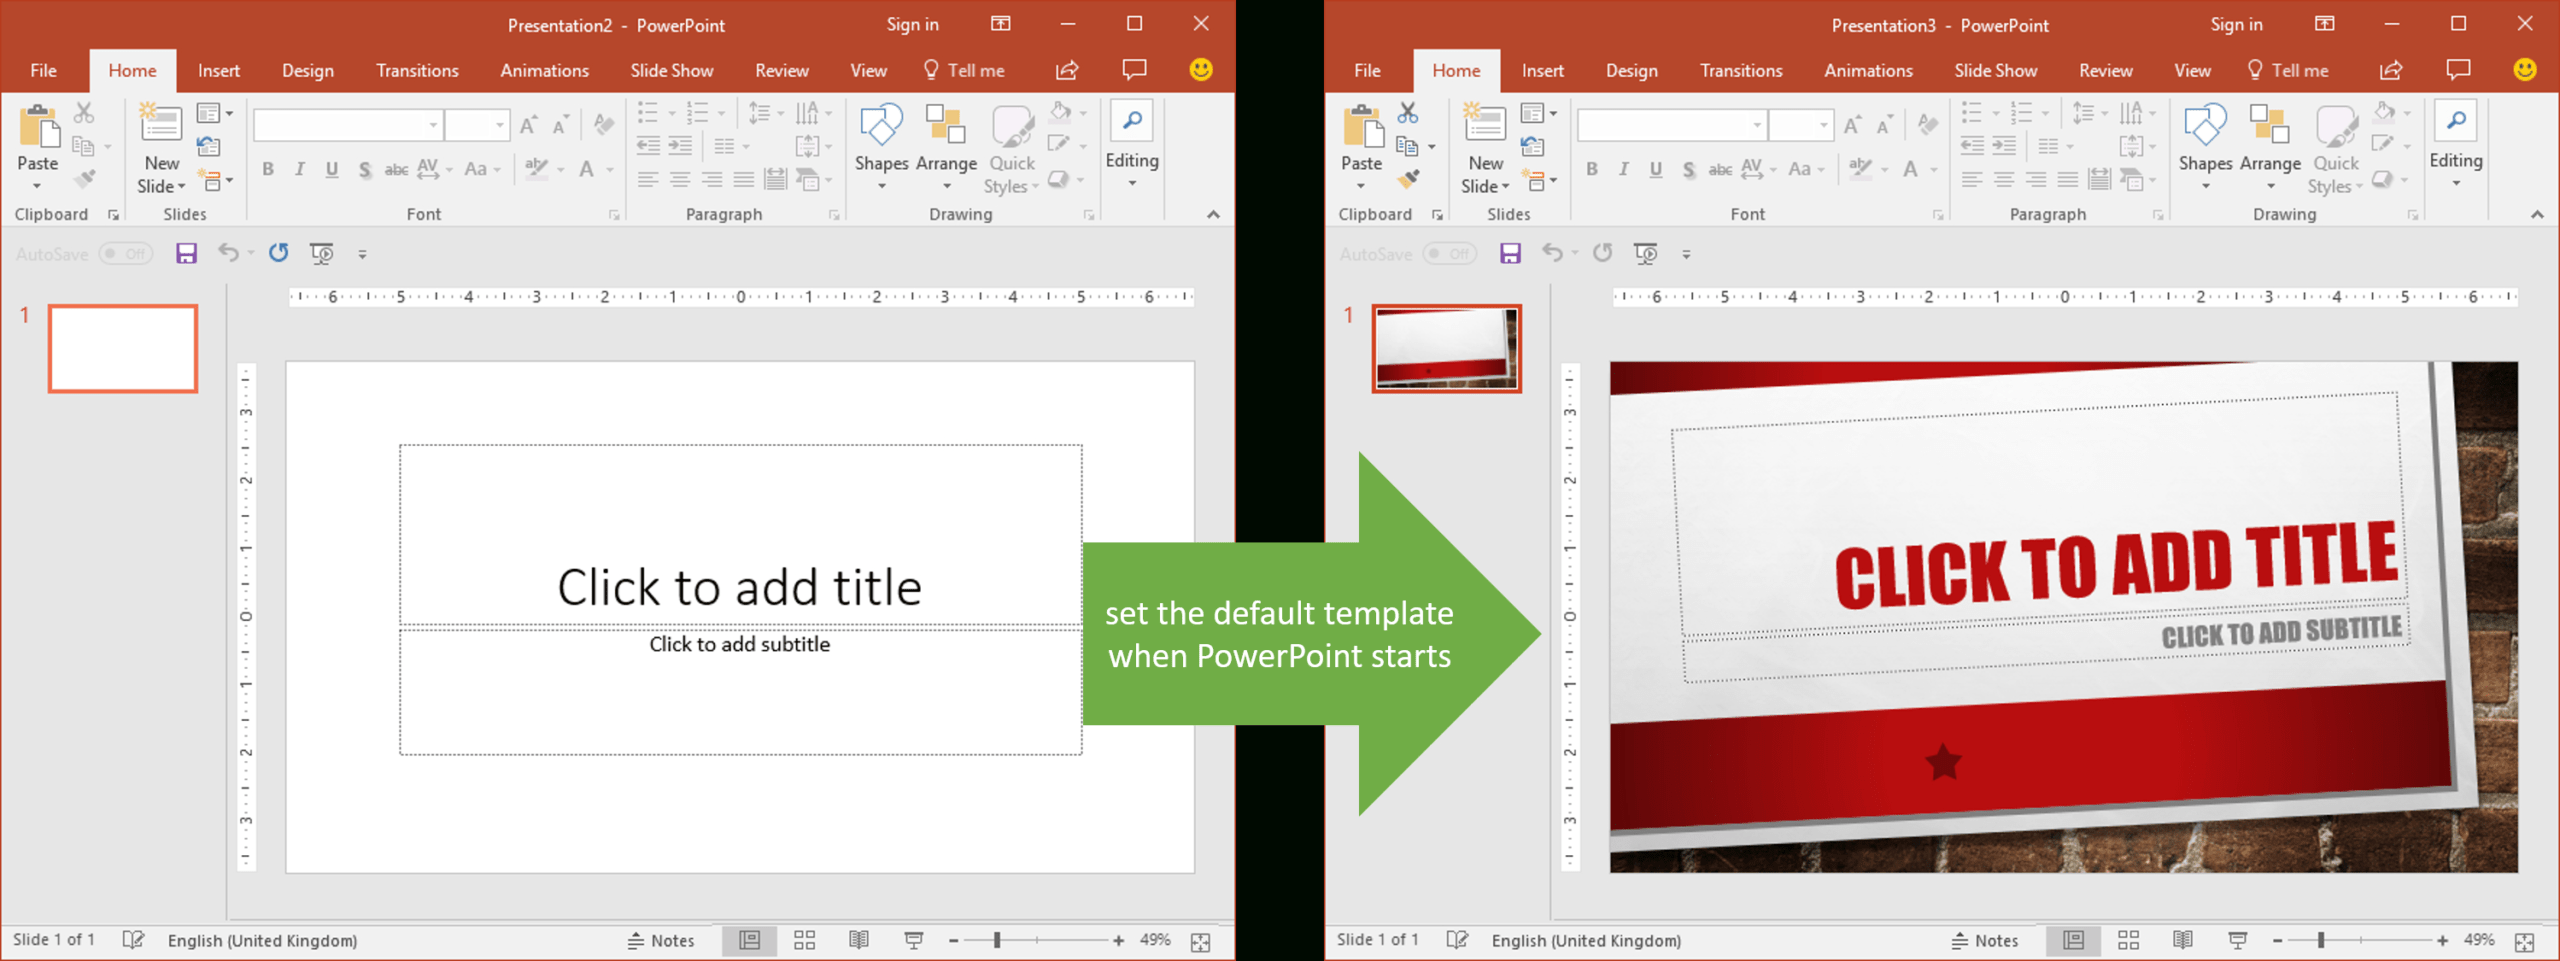 Set The Default Template When Powerpoint Starts | Youpresent With Regard To Powerpoint Replace Template